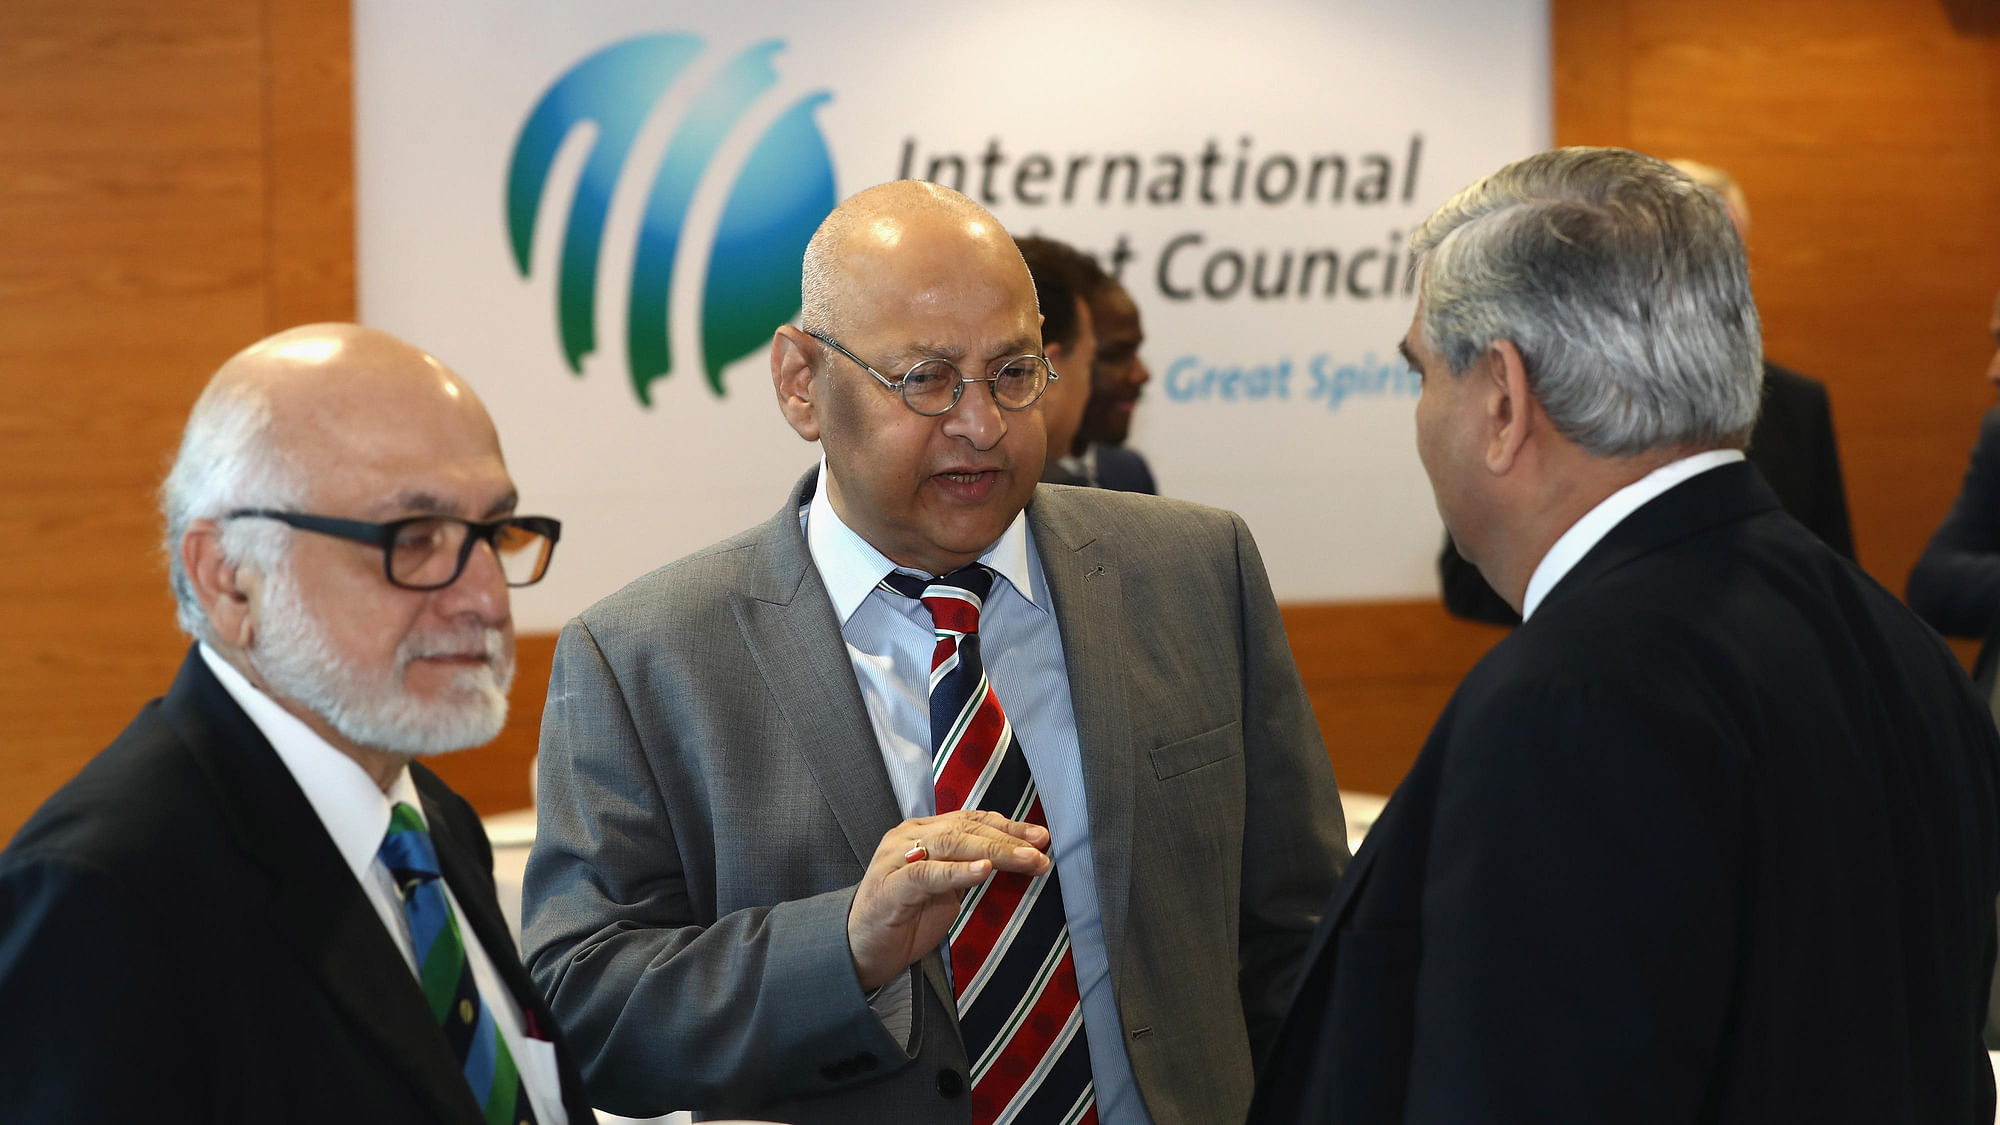 The International Cricket Council (ICC) has constituted a three-member dispute resolution committee to look into Pakistan Cricket Board’s (PCB) USD 60 million compensation claim against the BCCI for not honouring the MoU.